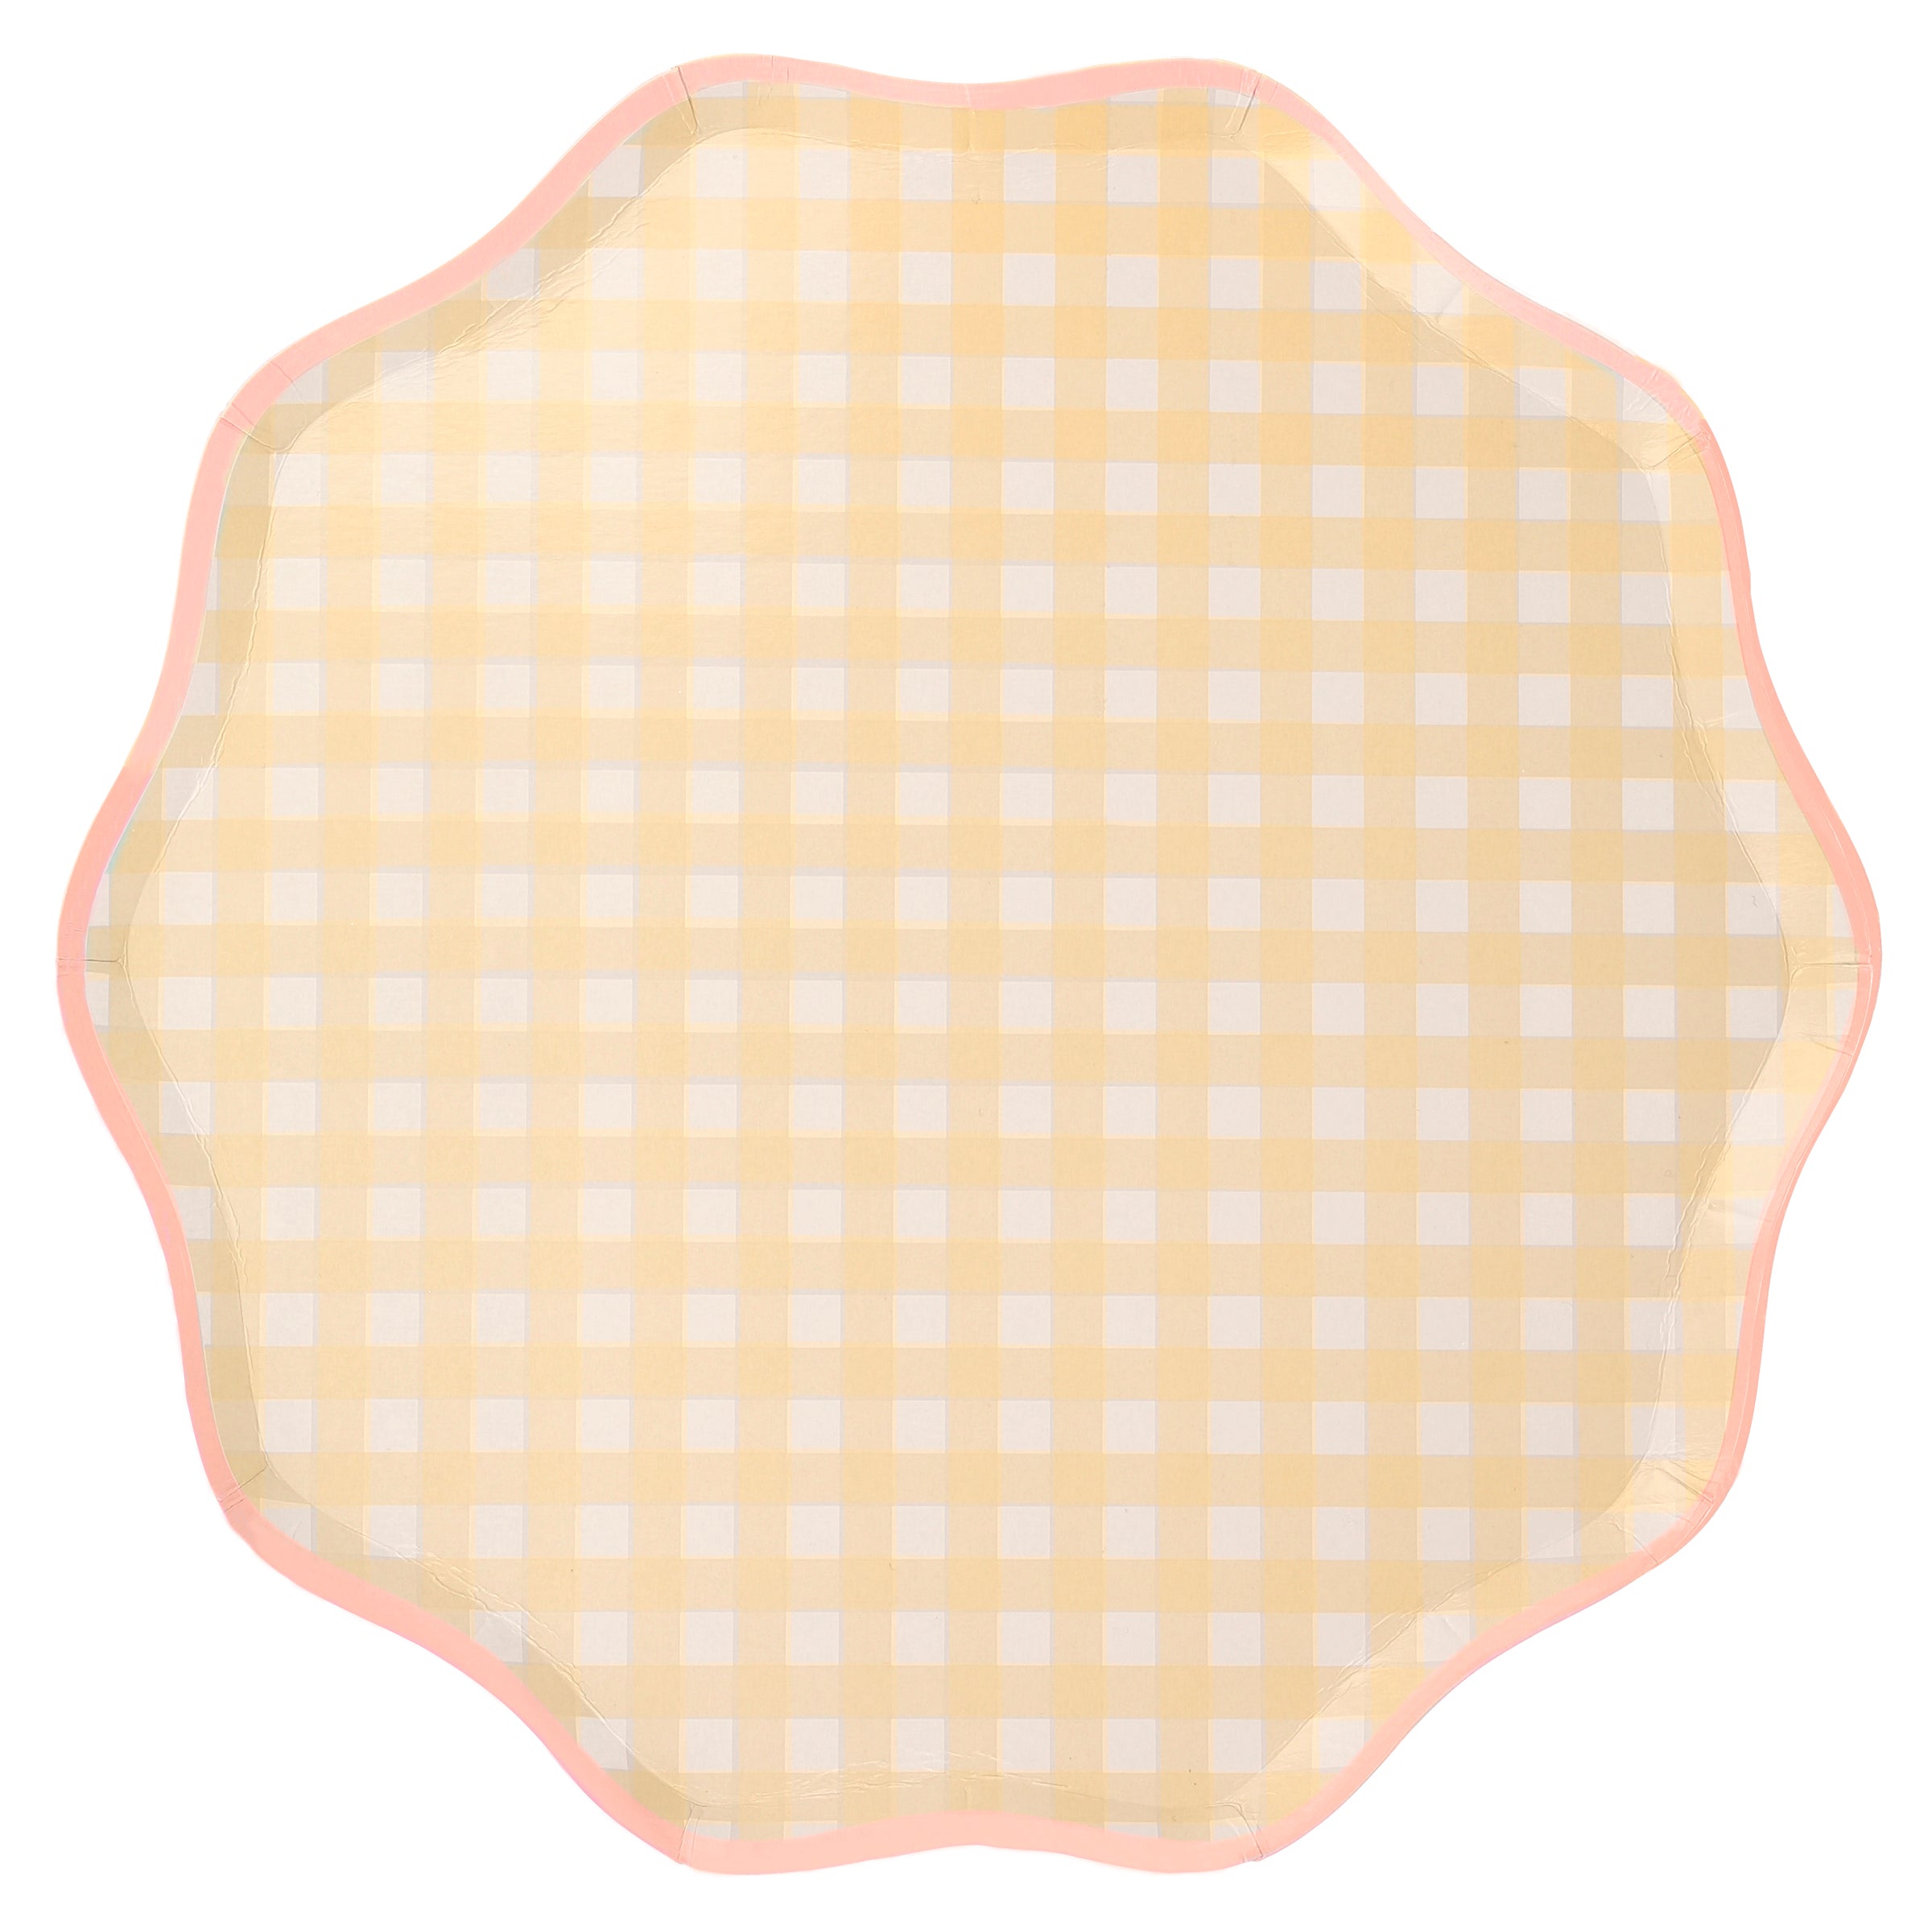 If you're looking for summer party ideas then our gingham dinner plates look amazing.